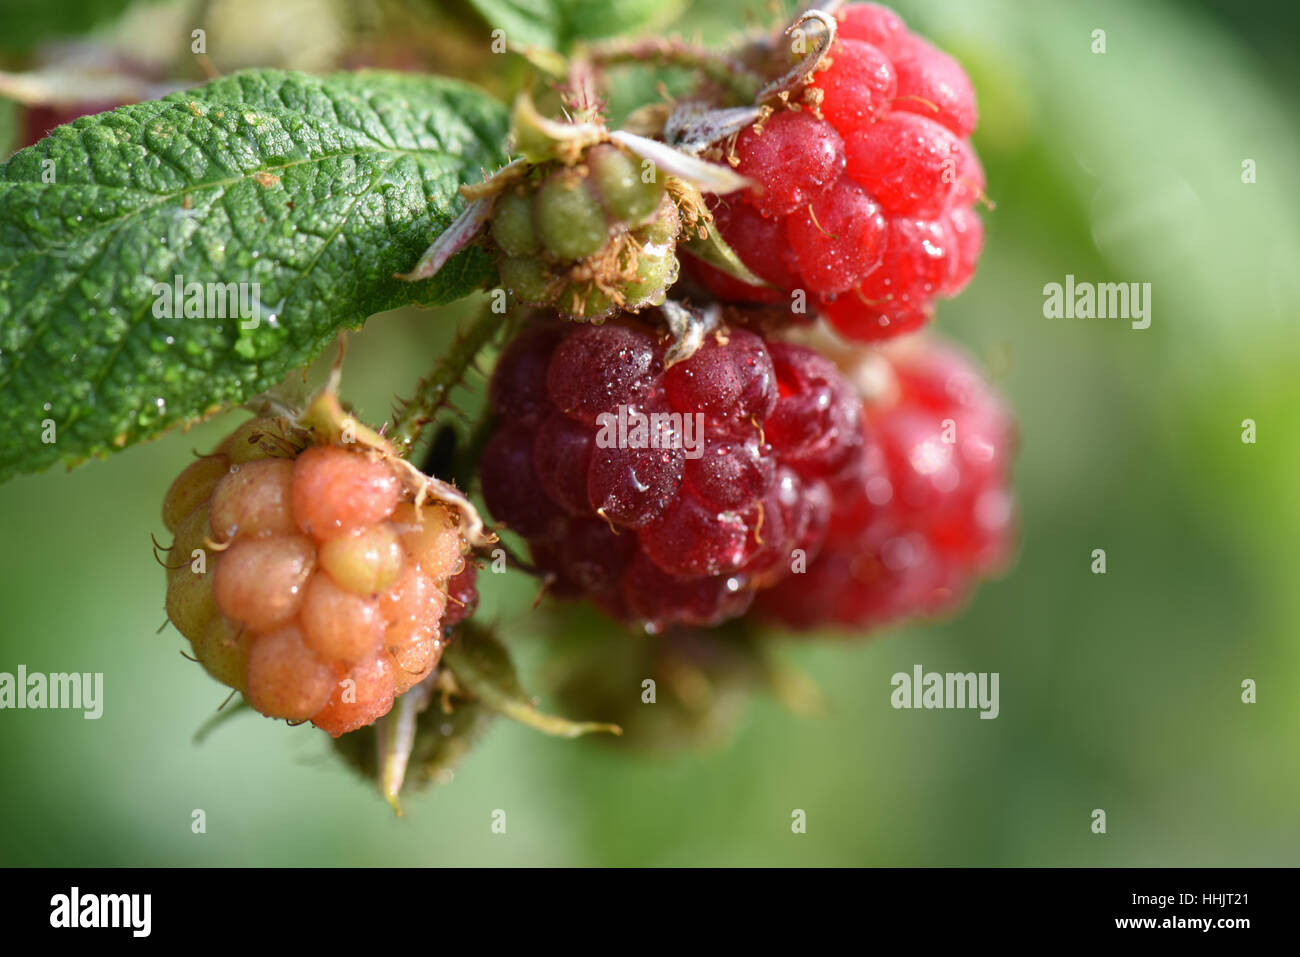 Raspberries fruit stages - stock and photography hi-res images Alamy